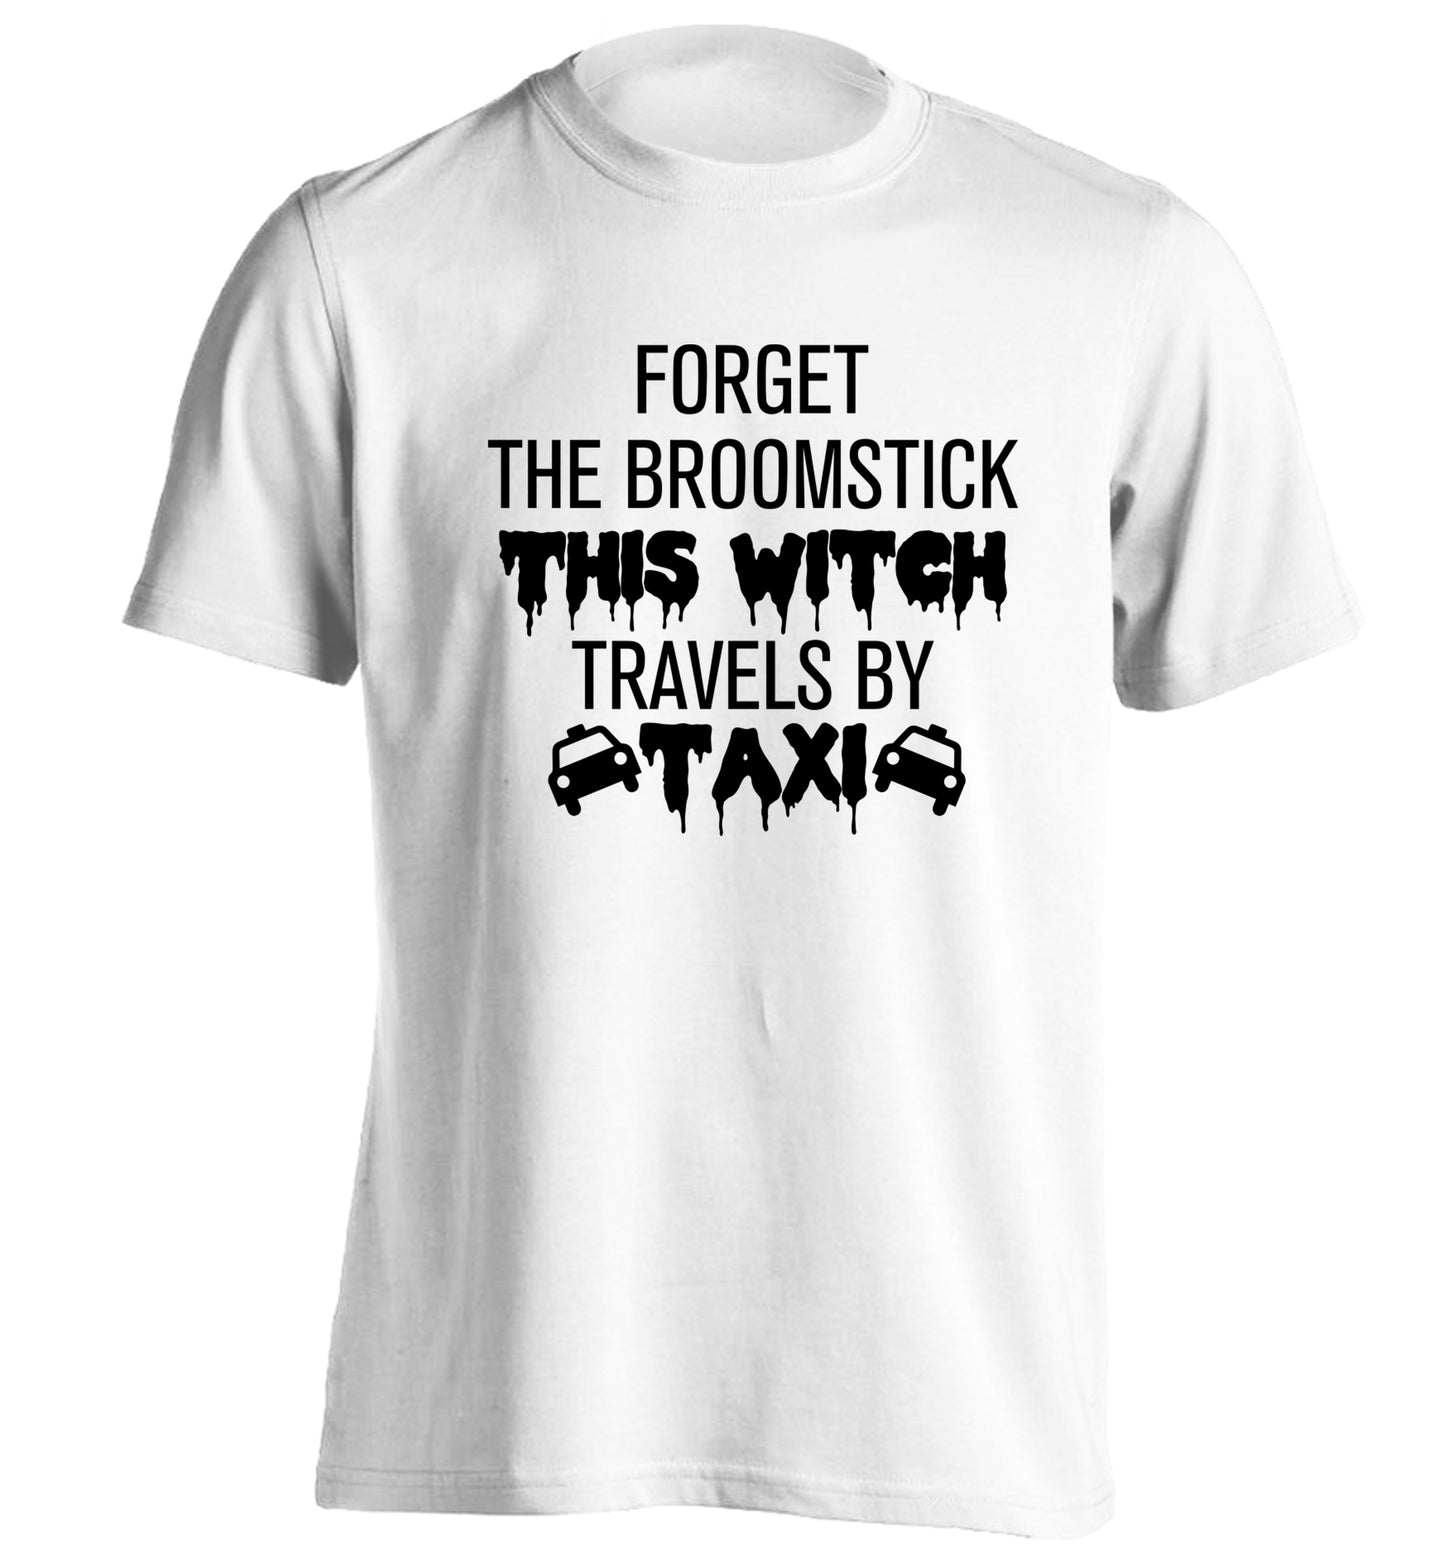 Forget the broomstick this witch travels by taxi adults unisexwhite Tshirt 2XL